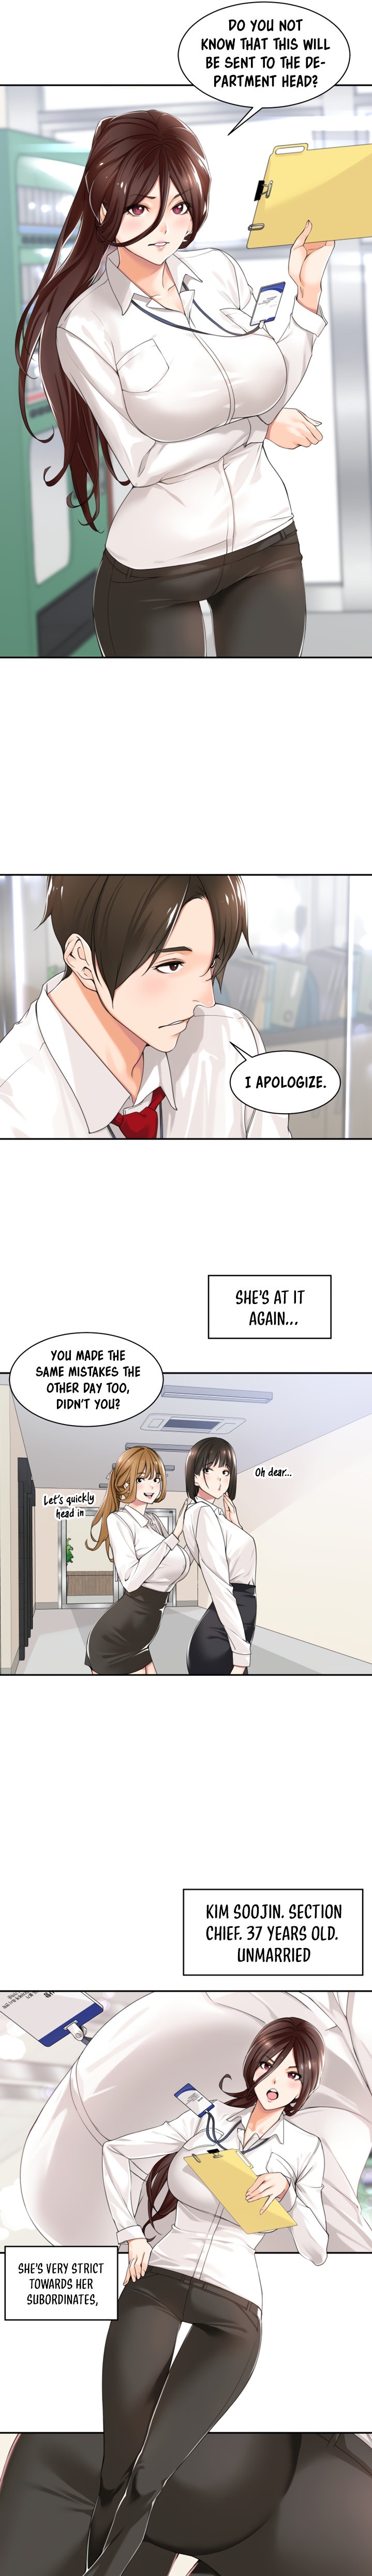 Manager, Please Scold Me - Chapter 1 Page 4